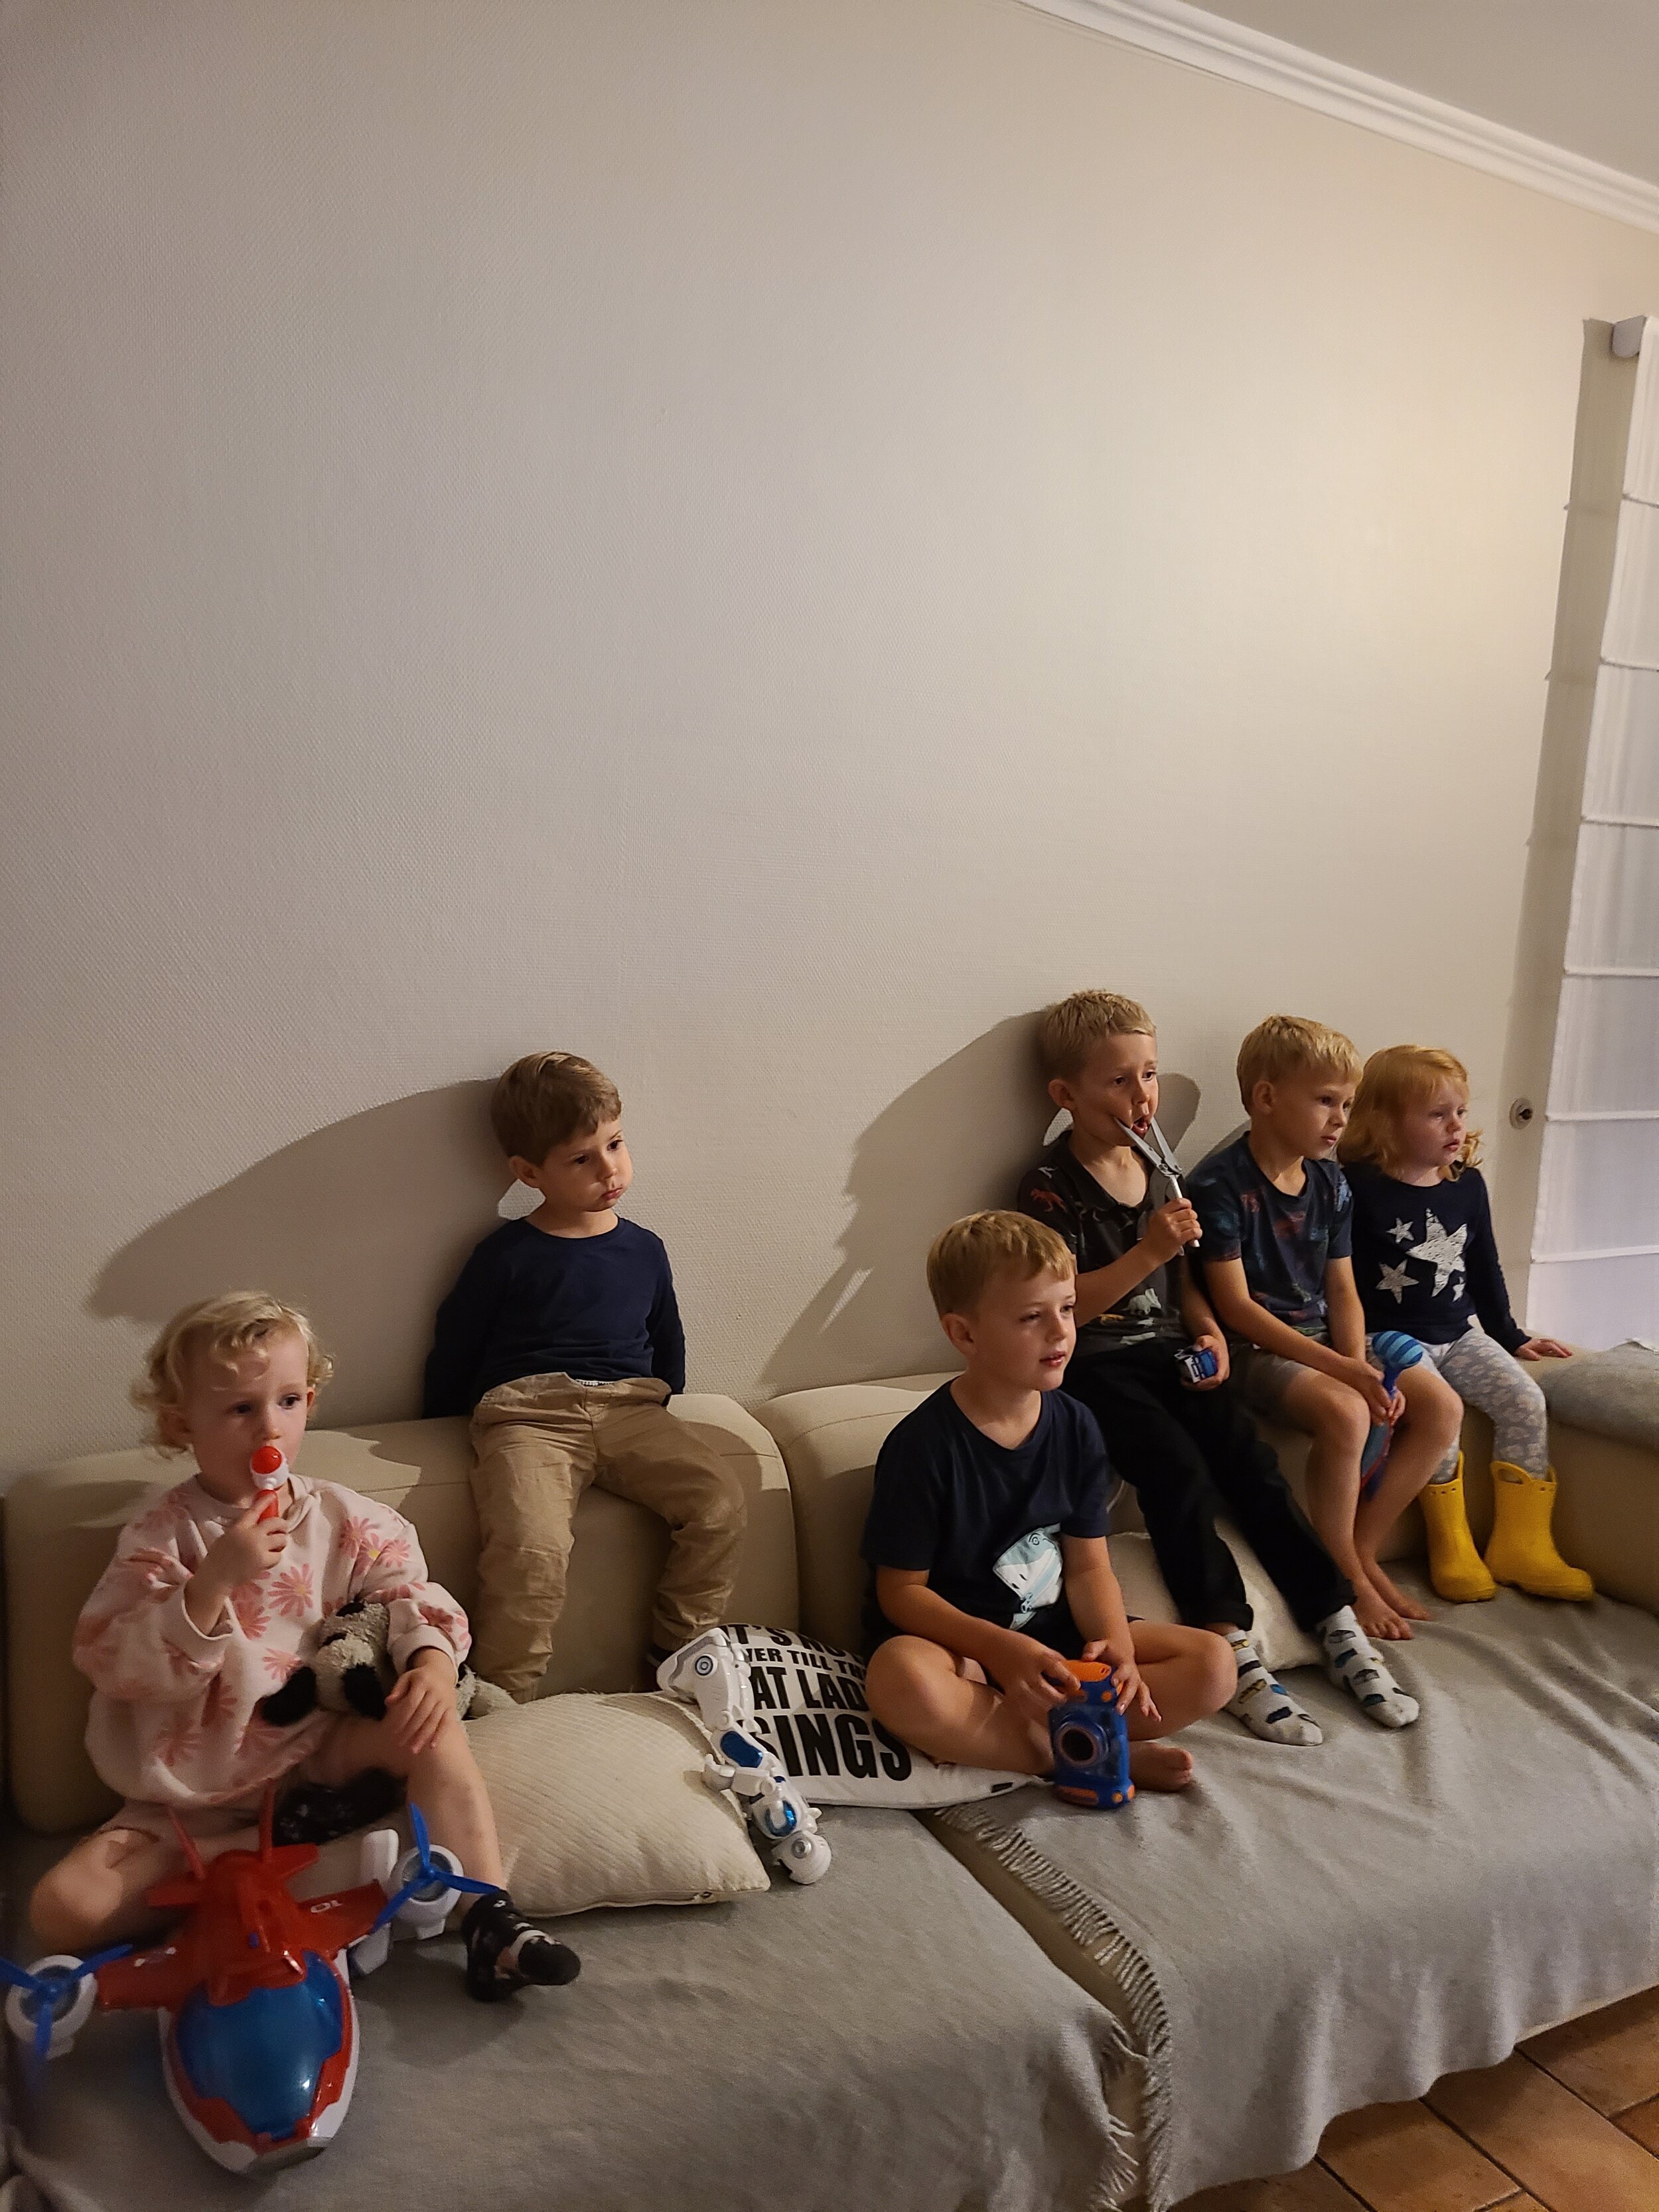  Kids mesmerized after dinner watching television 